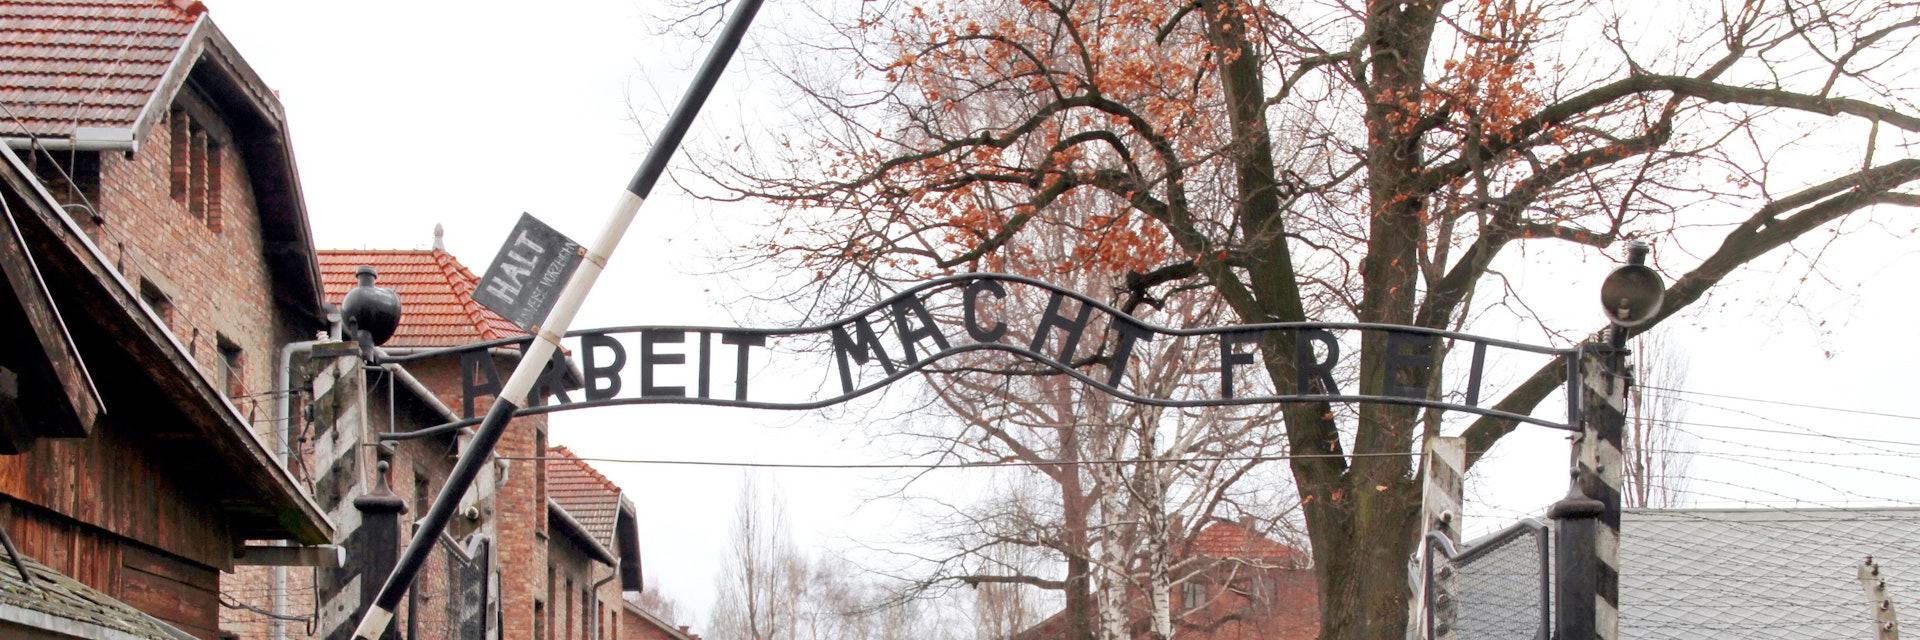 Gates to Auschwitz Birkenau Concentration Camp, Poland; Shutterstock ID 135123005; Your name (First / Last): Gemma Graham; GL account no.: 65050; Netsuite department name: Online Editorial; Full Product or Project name including edition: BiT Destination Page Images